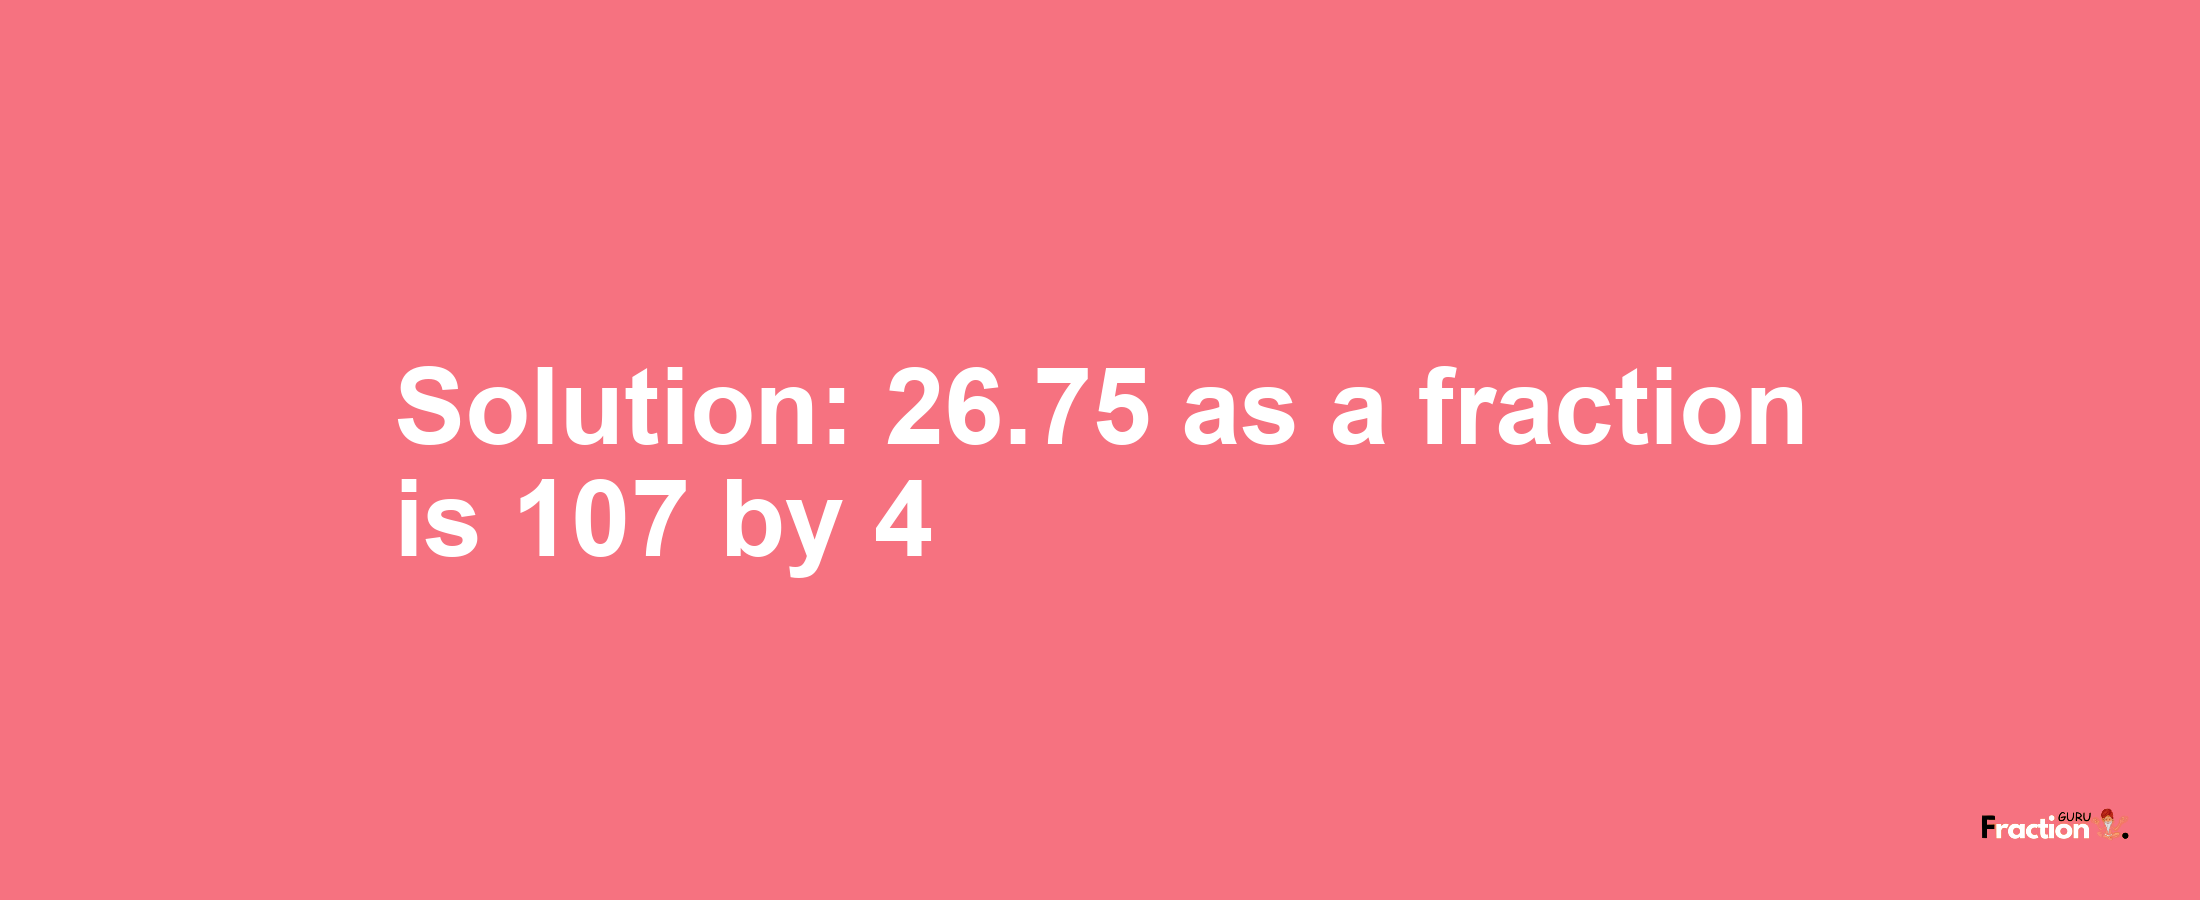 Solution:26.75 as a fraction is 107/4